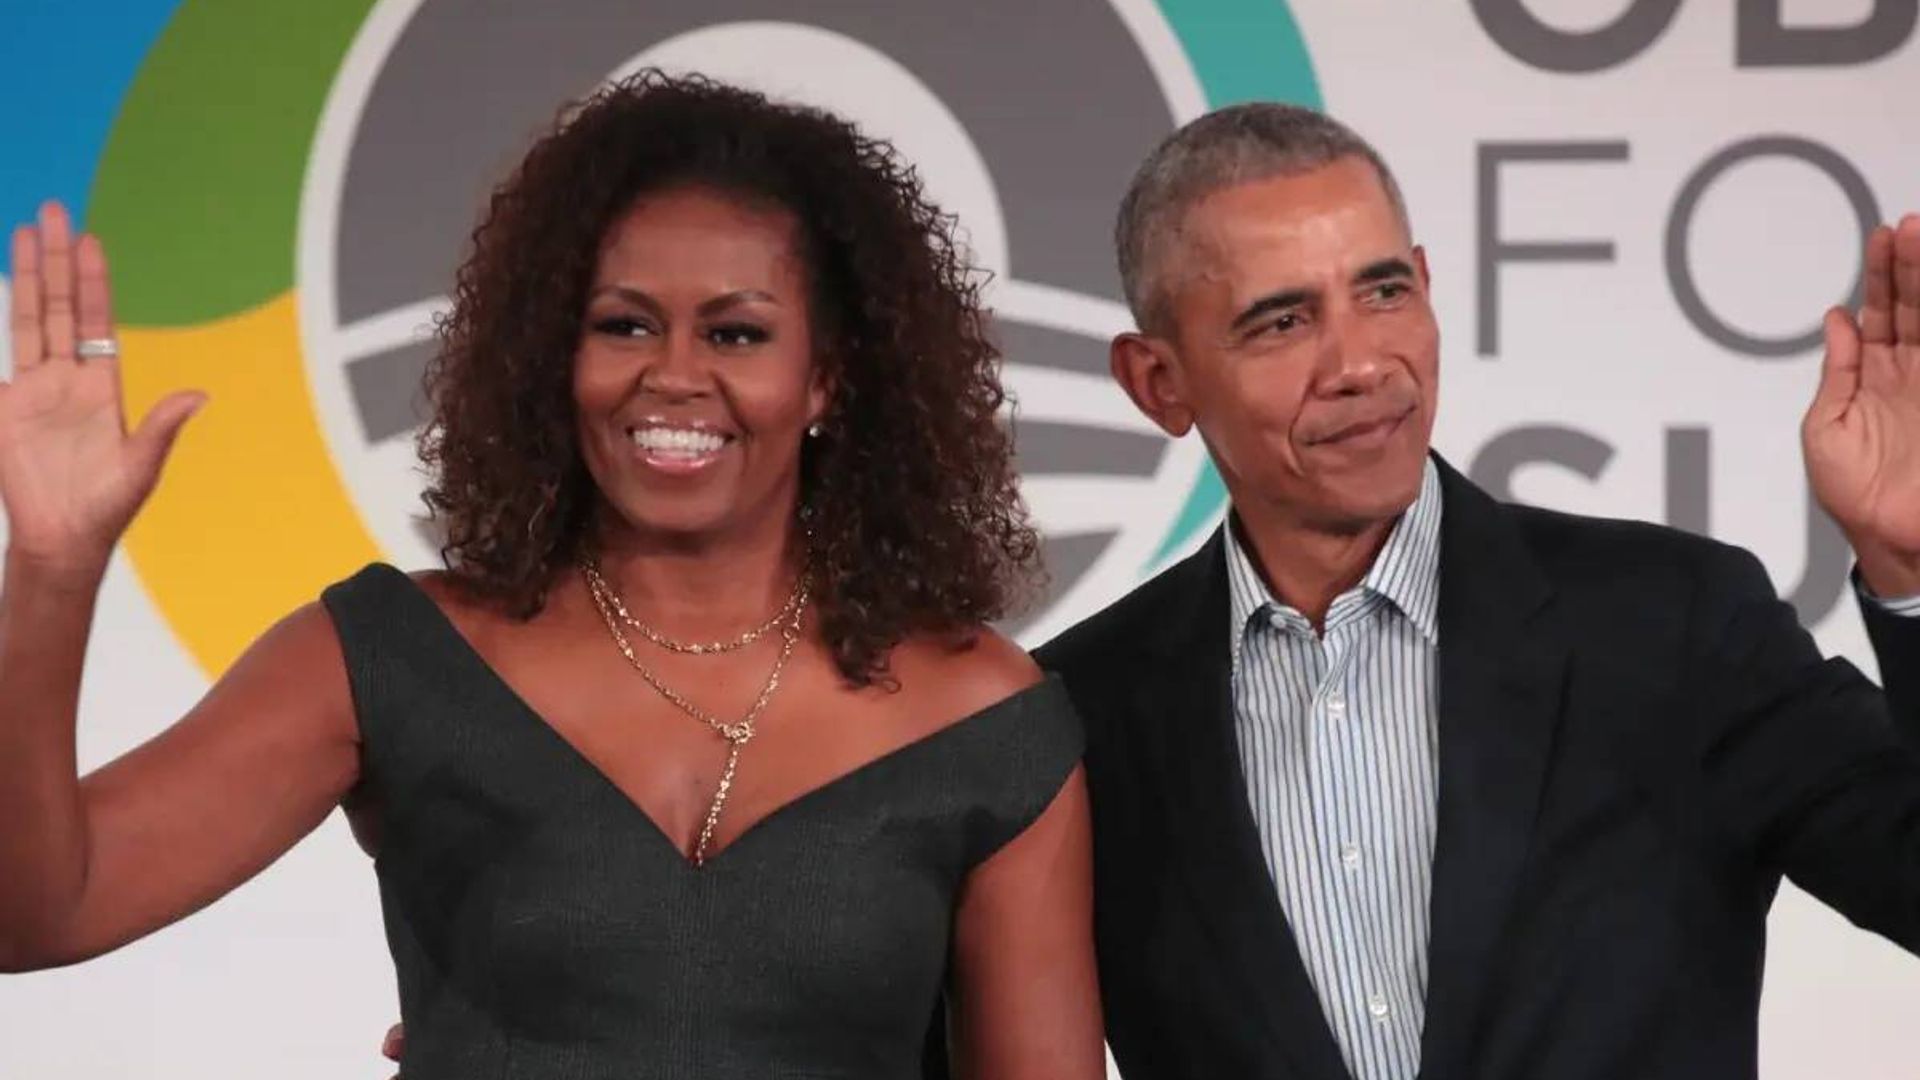 Michelle Obama dazzled at Barack Obama’s 60th birthday party in a dress you need to see